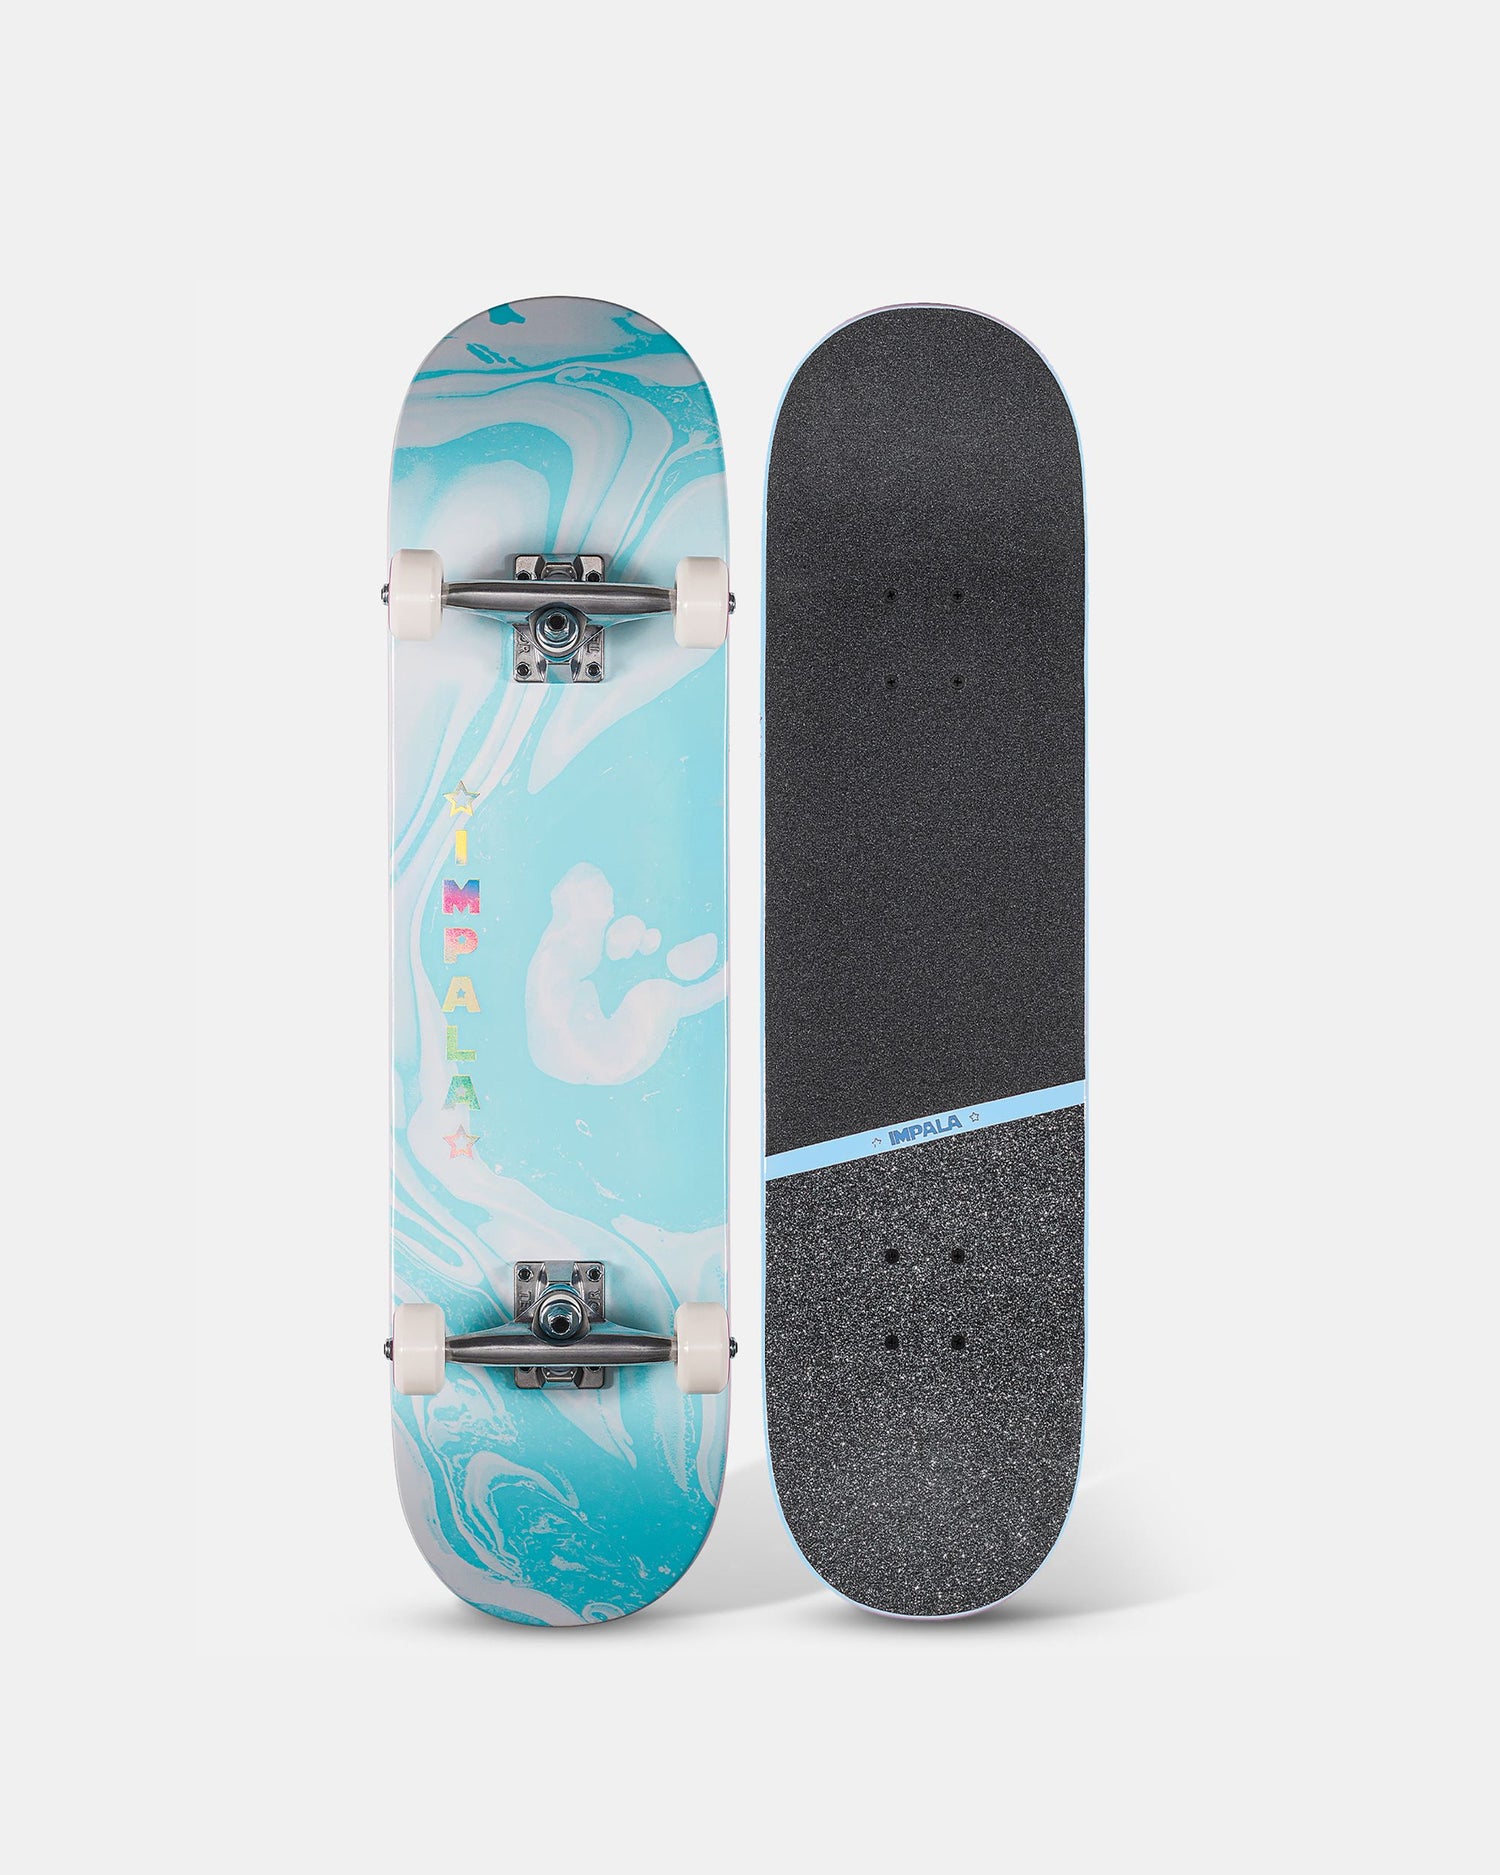 Top and bottom view of Impala Cosmos Skateboard - Blue